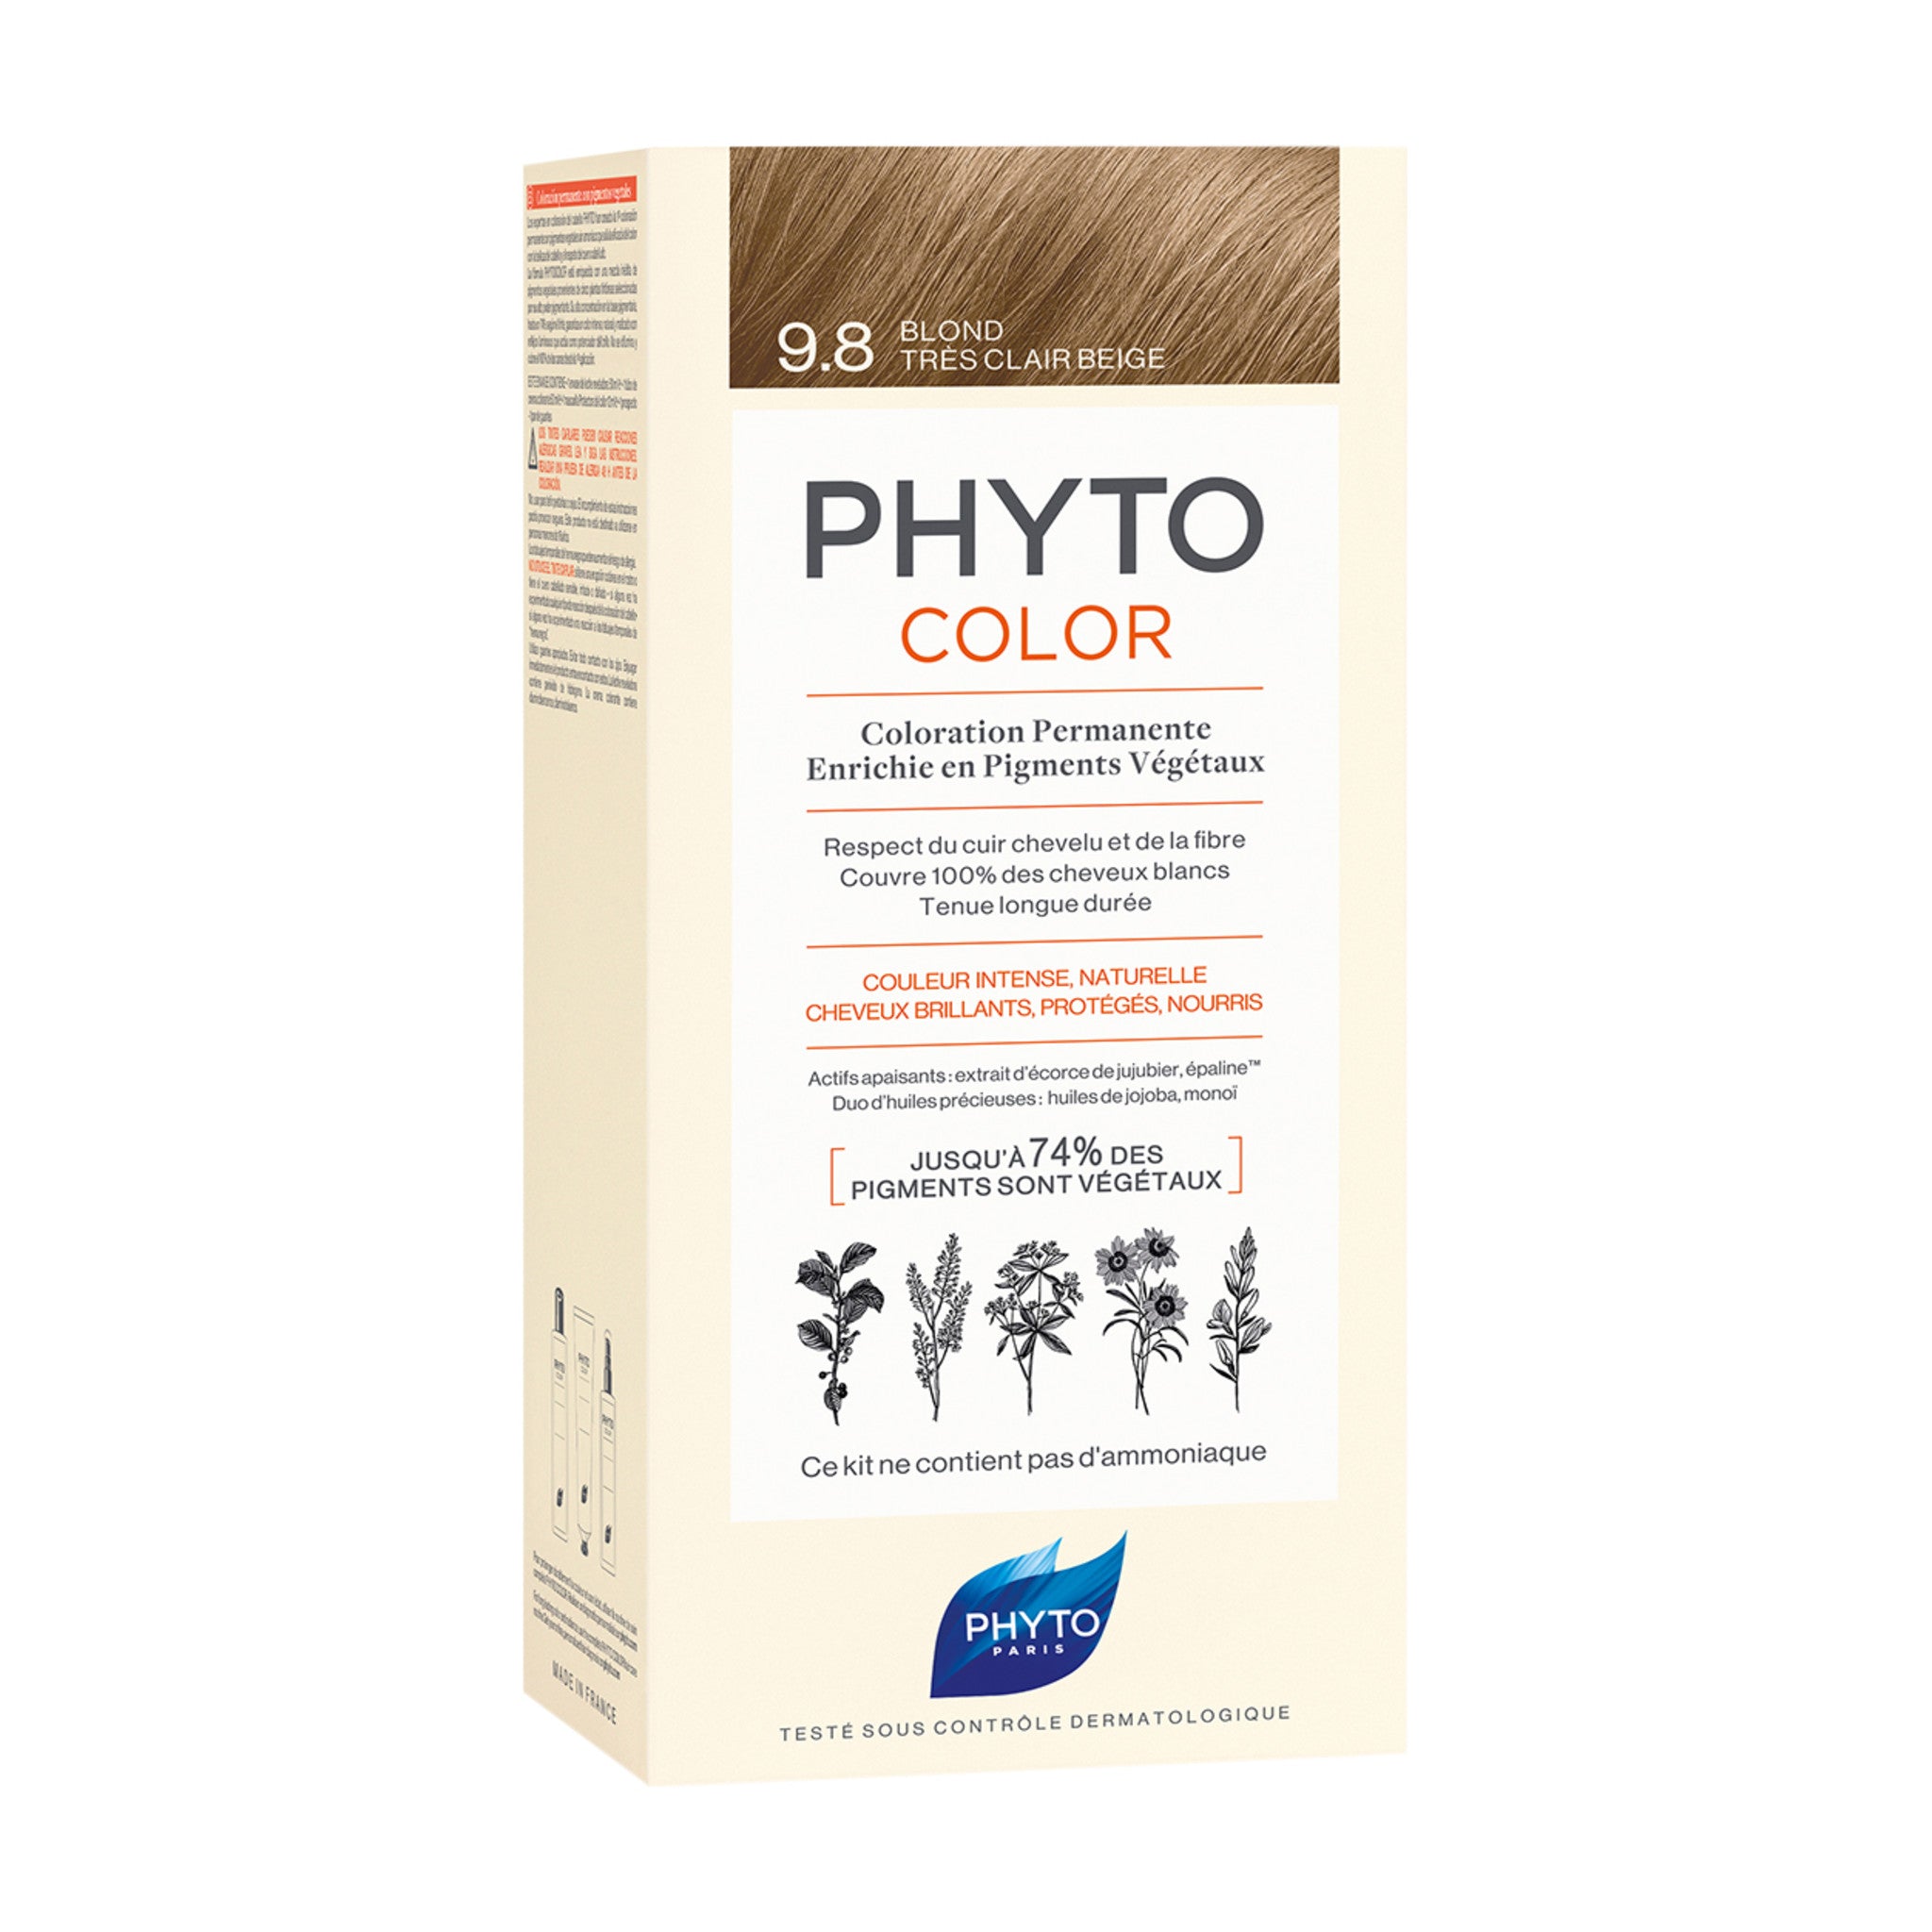 Phyto Phytocolor Color/Shade variant: 9.8 Very Light Beige Blond main image.